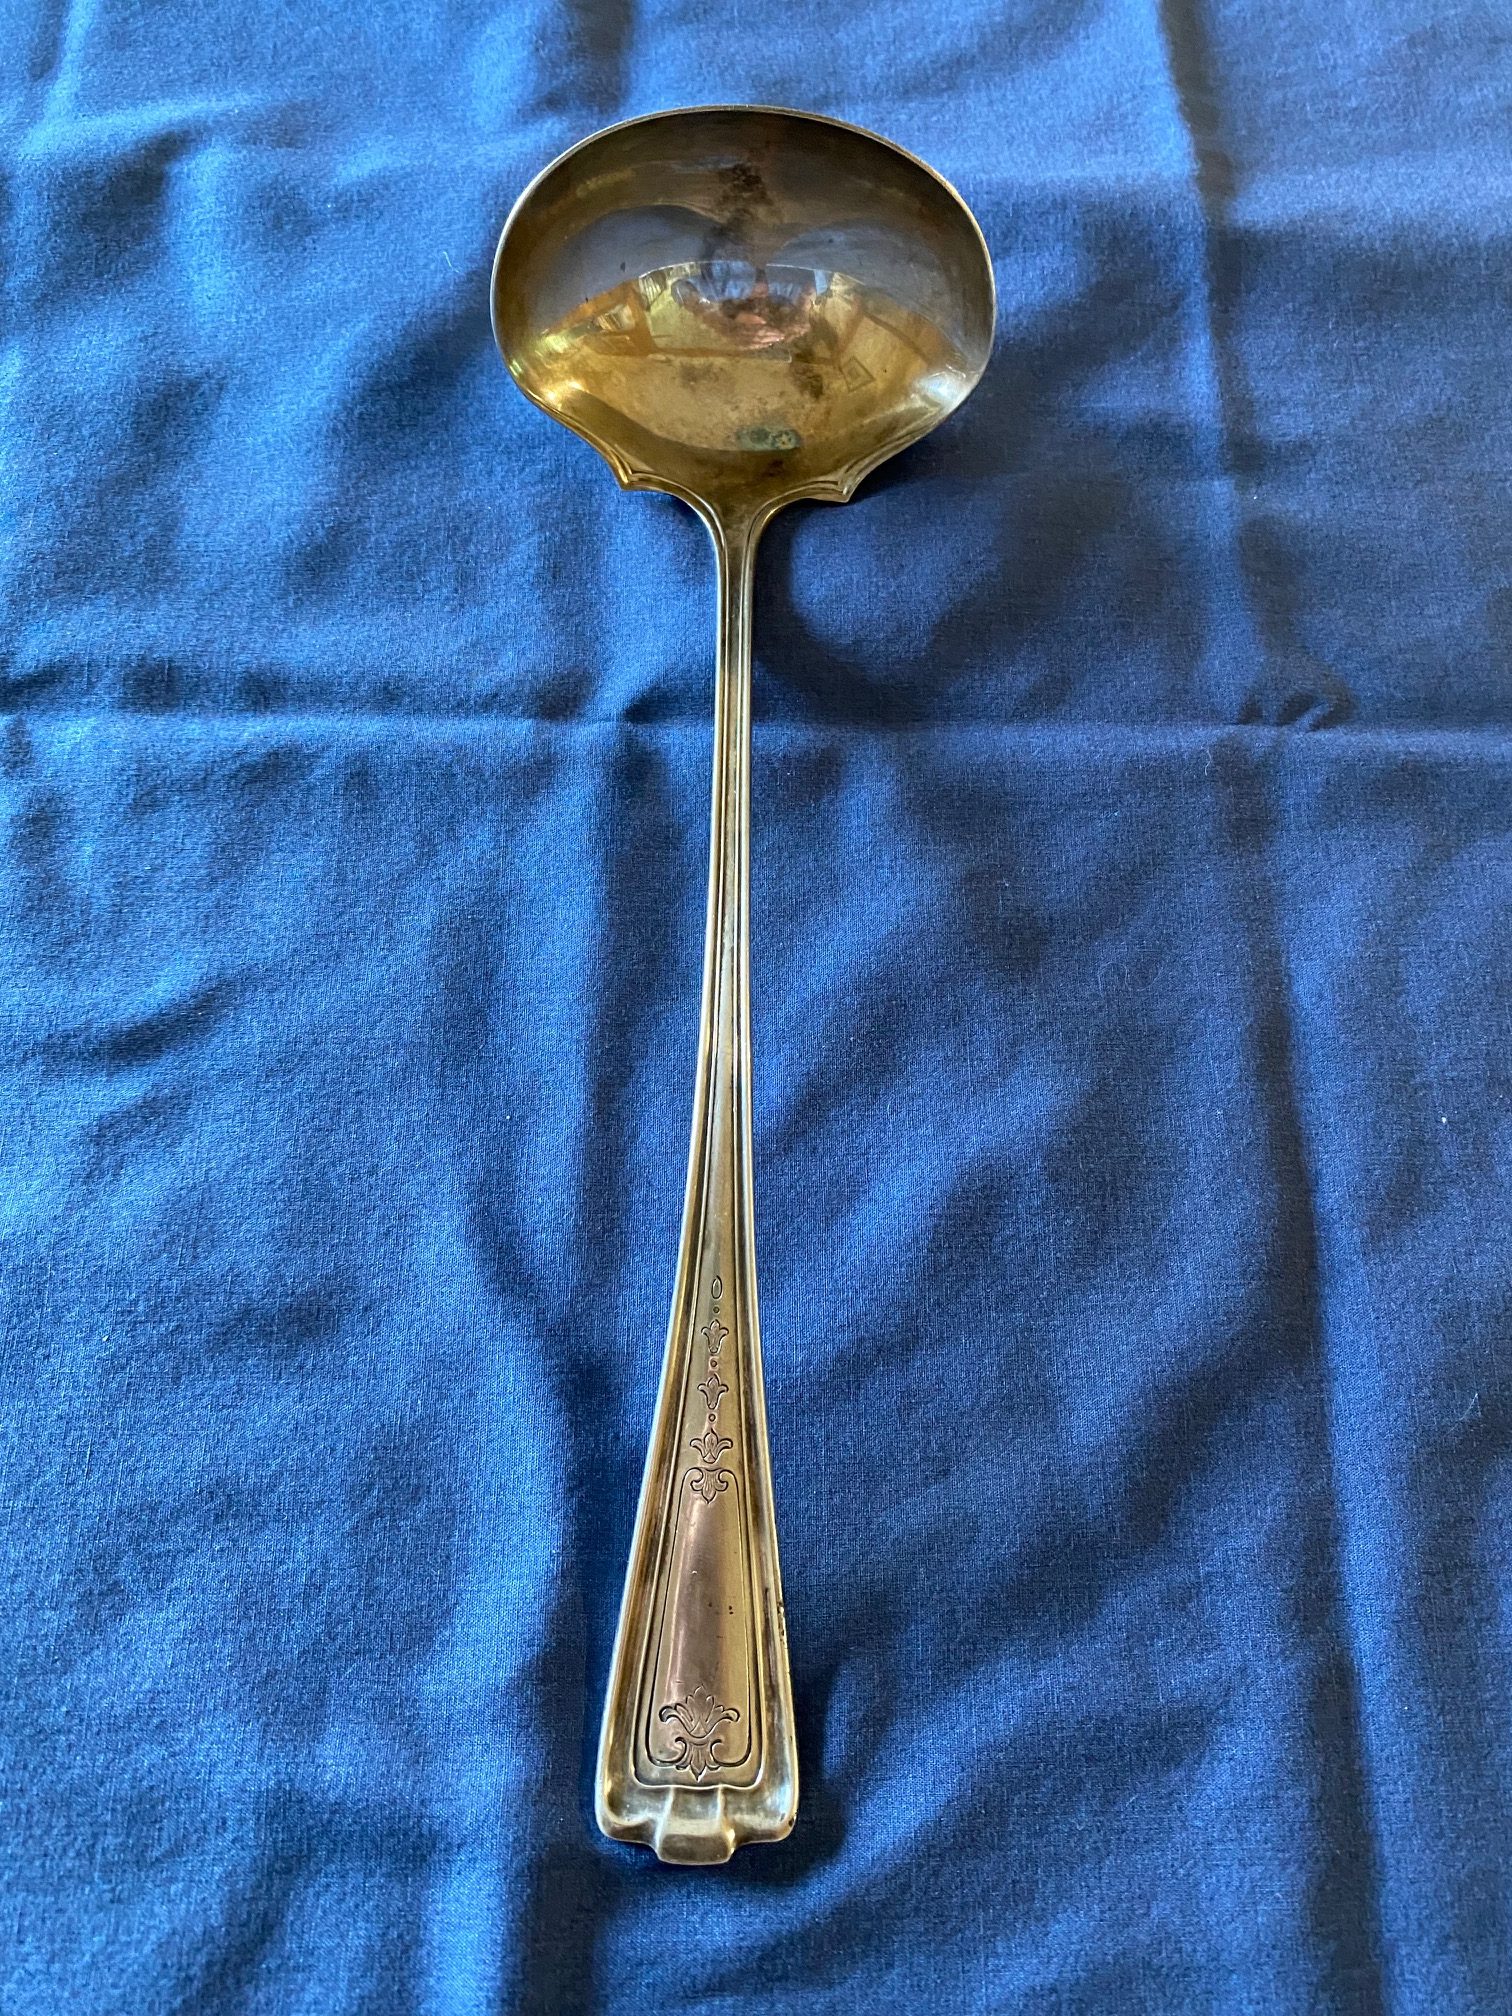 1847 Rogers Bros. Vintage Soup Ladle, Cromwell Pattern, Silver Plated